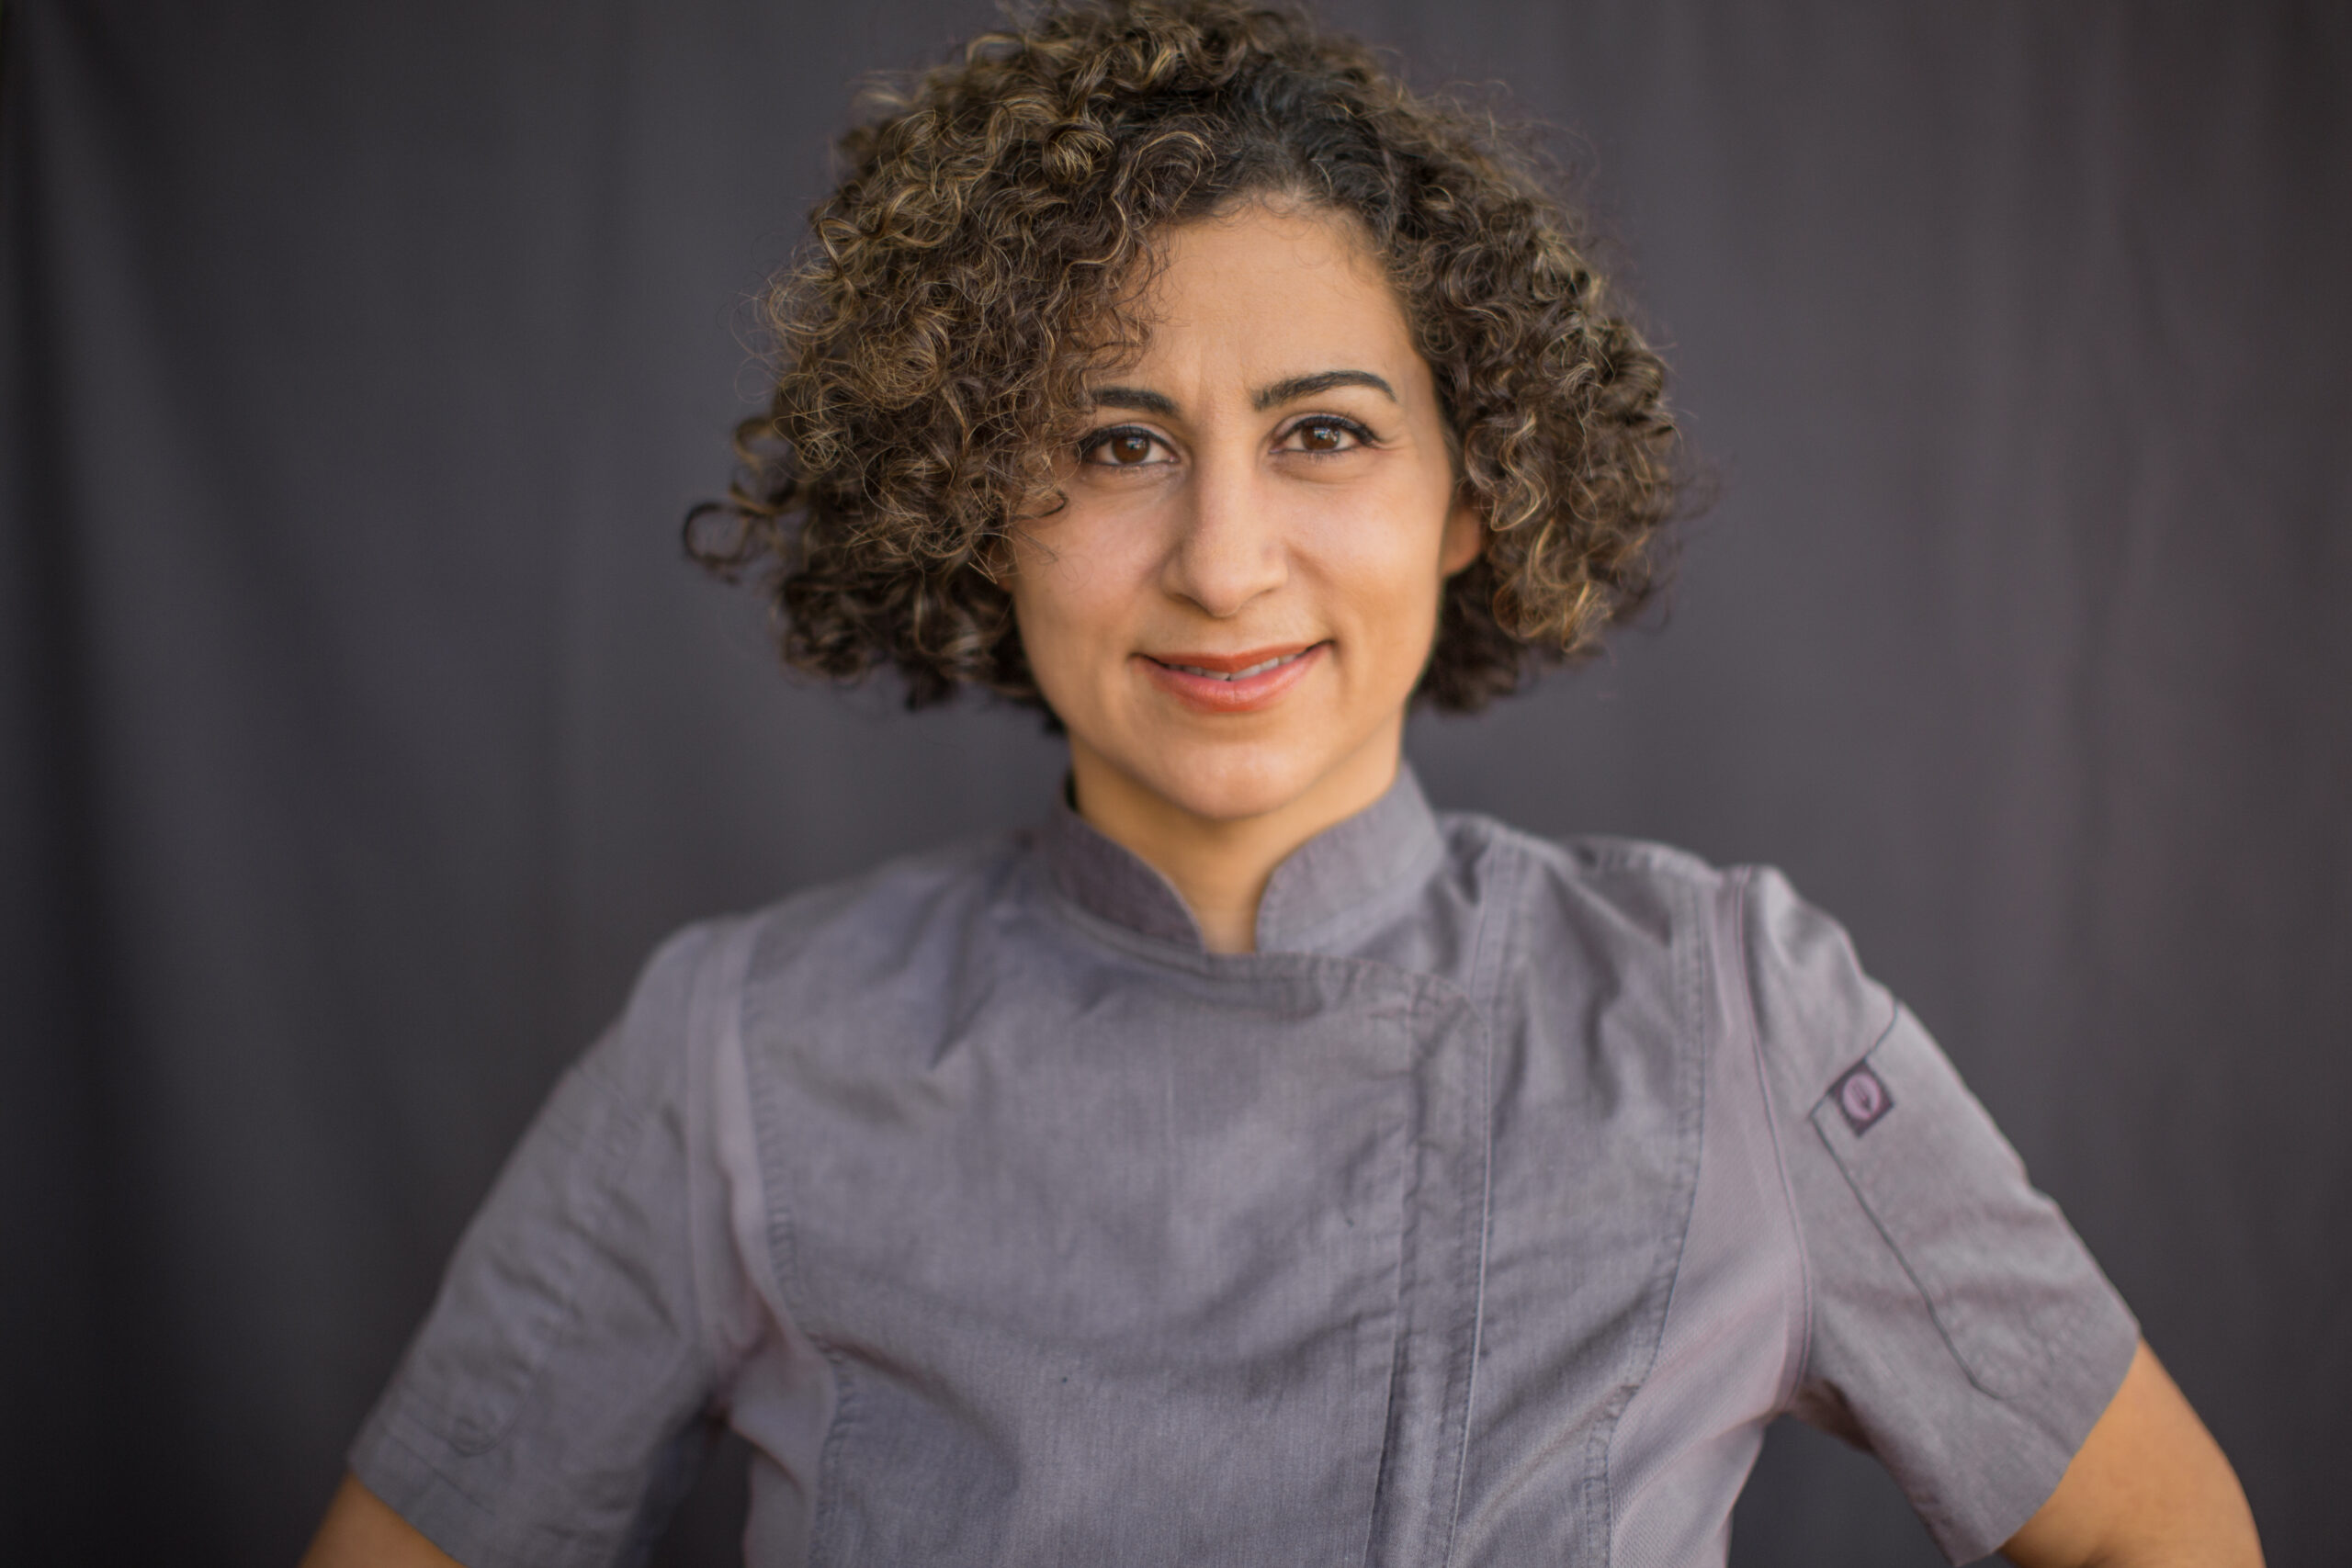 With Her New Book, Local Arab Chef Reem Assil Hopes to Win Hearts and Minds